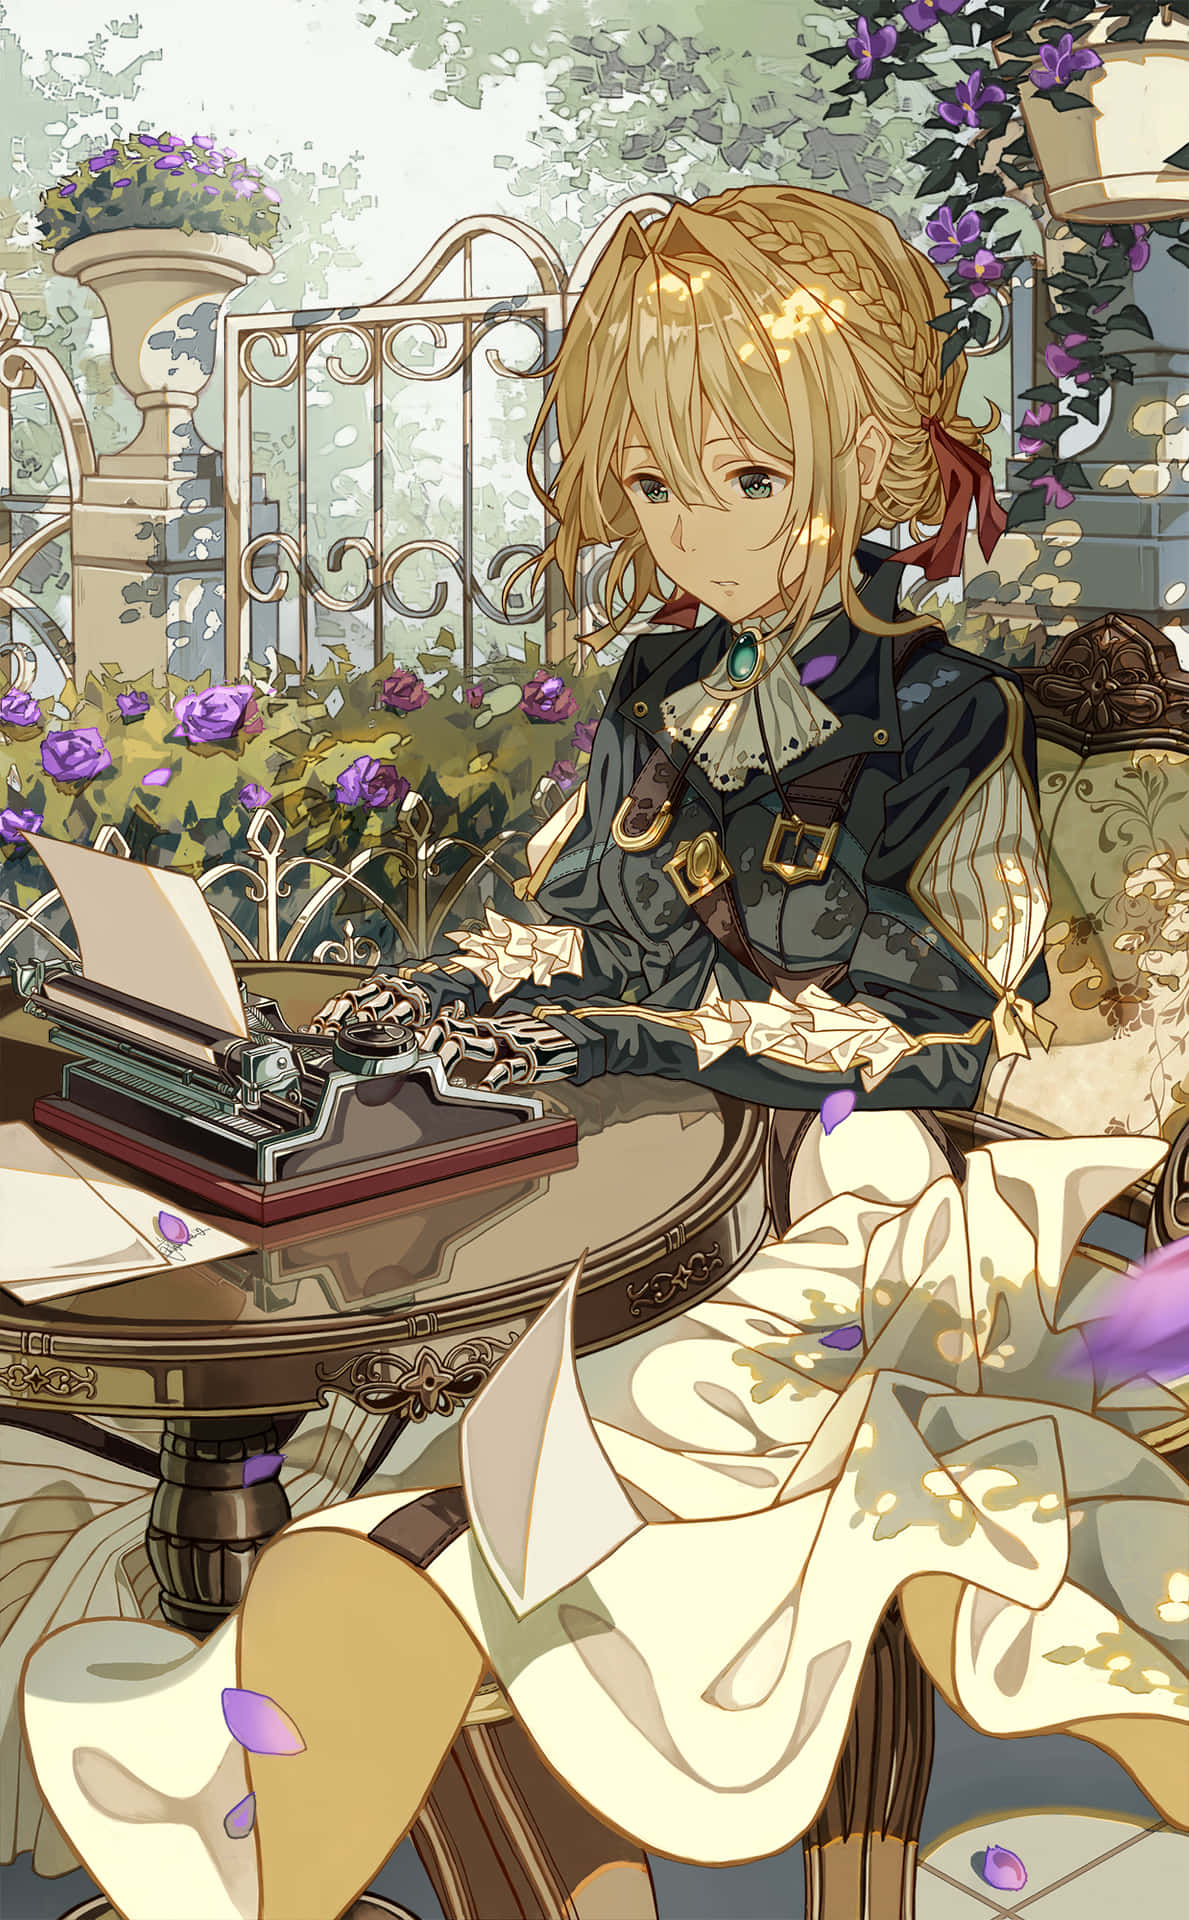 Bring your favorite anime to life with Violet Evergarden wallpaper on your Iphone! Wallpaper